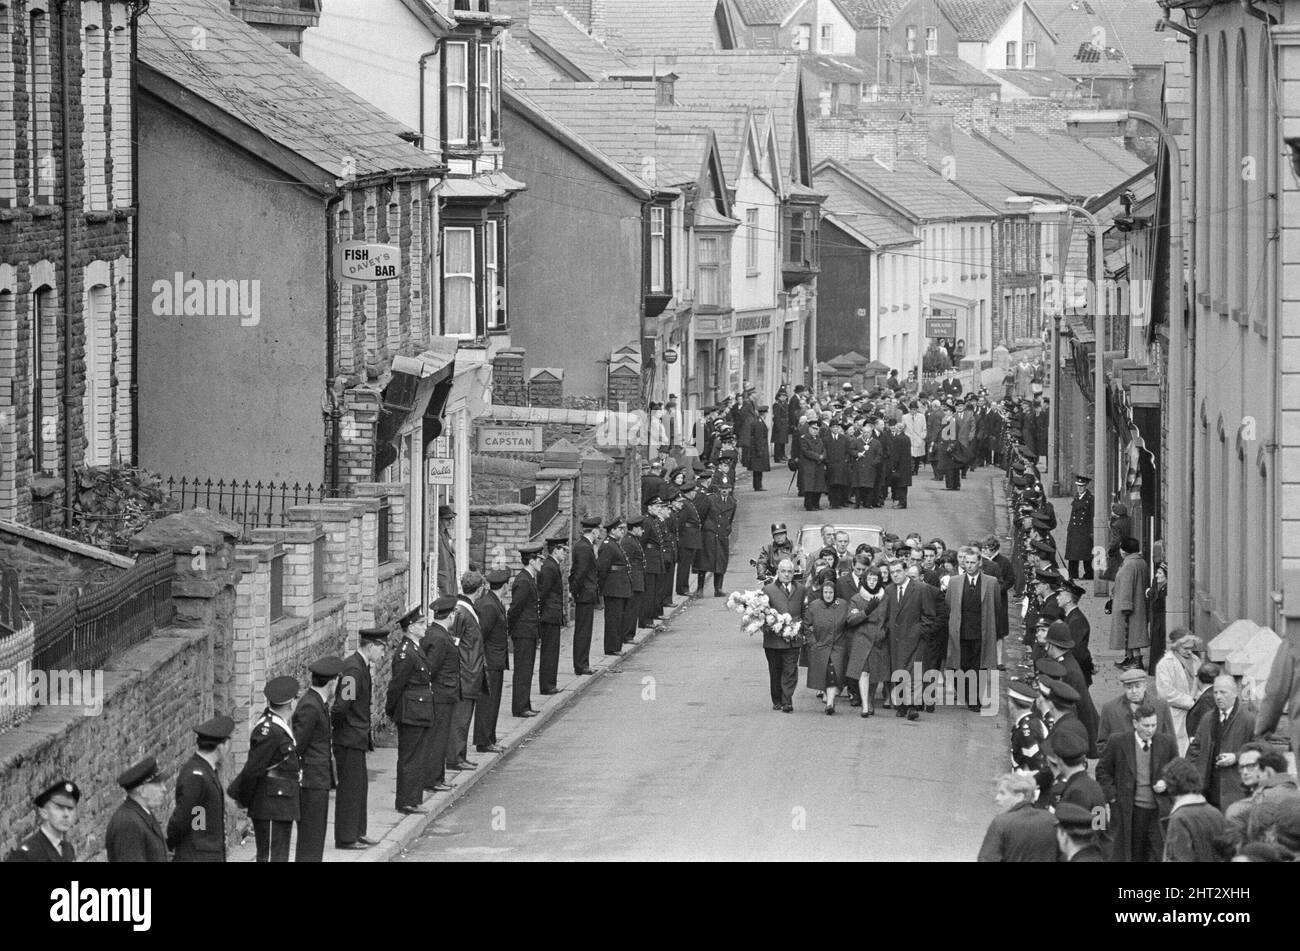 Aberfan - 27th October 1966.  Mourners walk through the streets, on their way to the cemetery to attend the mass funeral for victims of the Aberfan mud slide disaster. The streets are lined with members of the emergency services as a mark of respect.  The Aberfan disaster was a catastrophic collapse of a colliery spoil tip in the Welsh village of Aberfan, near Merthyr Tydfil. It was caused by a build-up of water in the accumulated rock and shale, which suddenly started to slide downhill in the form of slurry and engulfed The Pantglas Junior School below, on 21st October 1966, killing 116 child Stock Photo